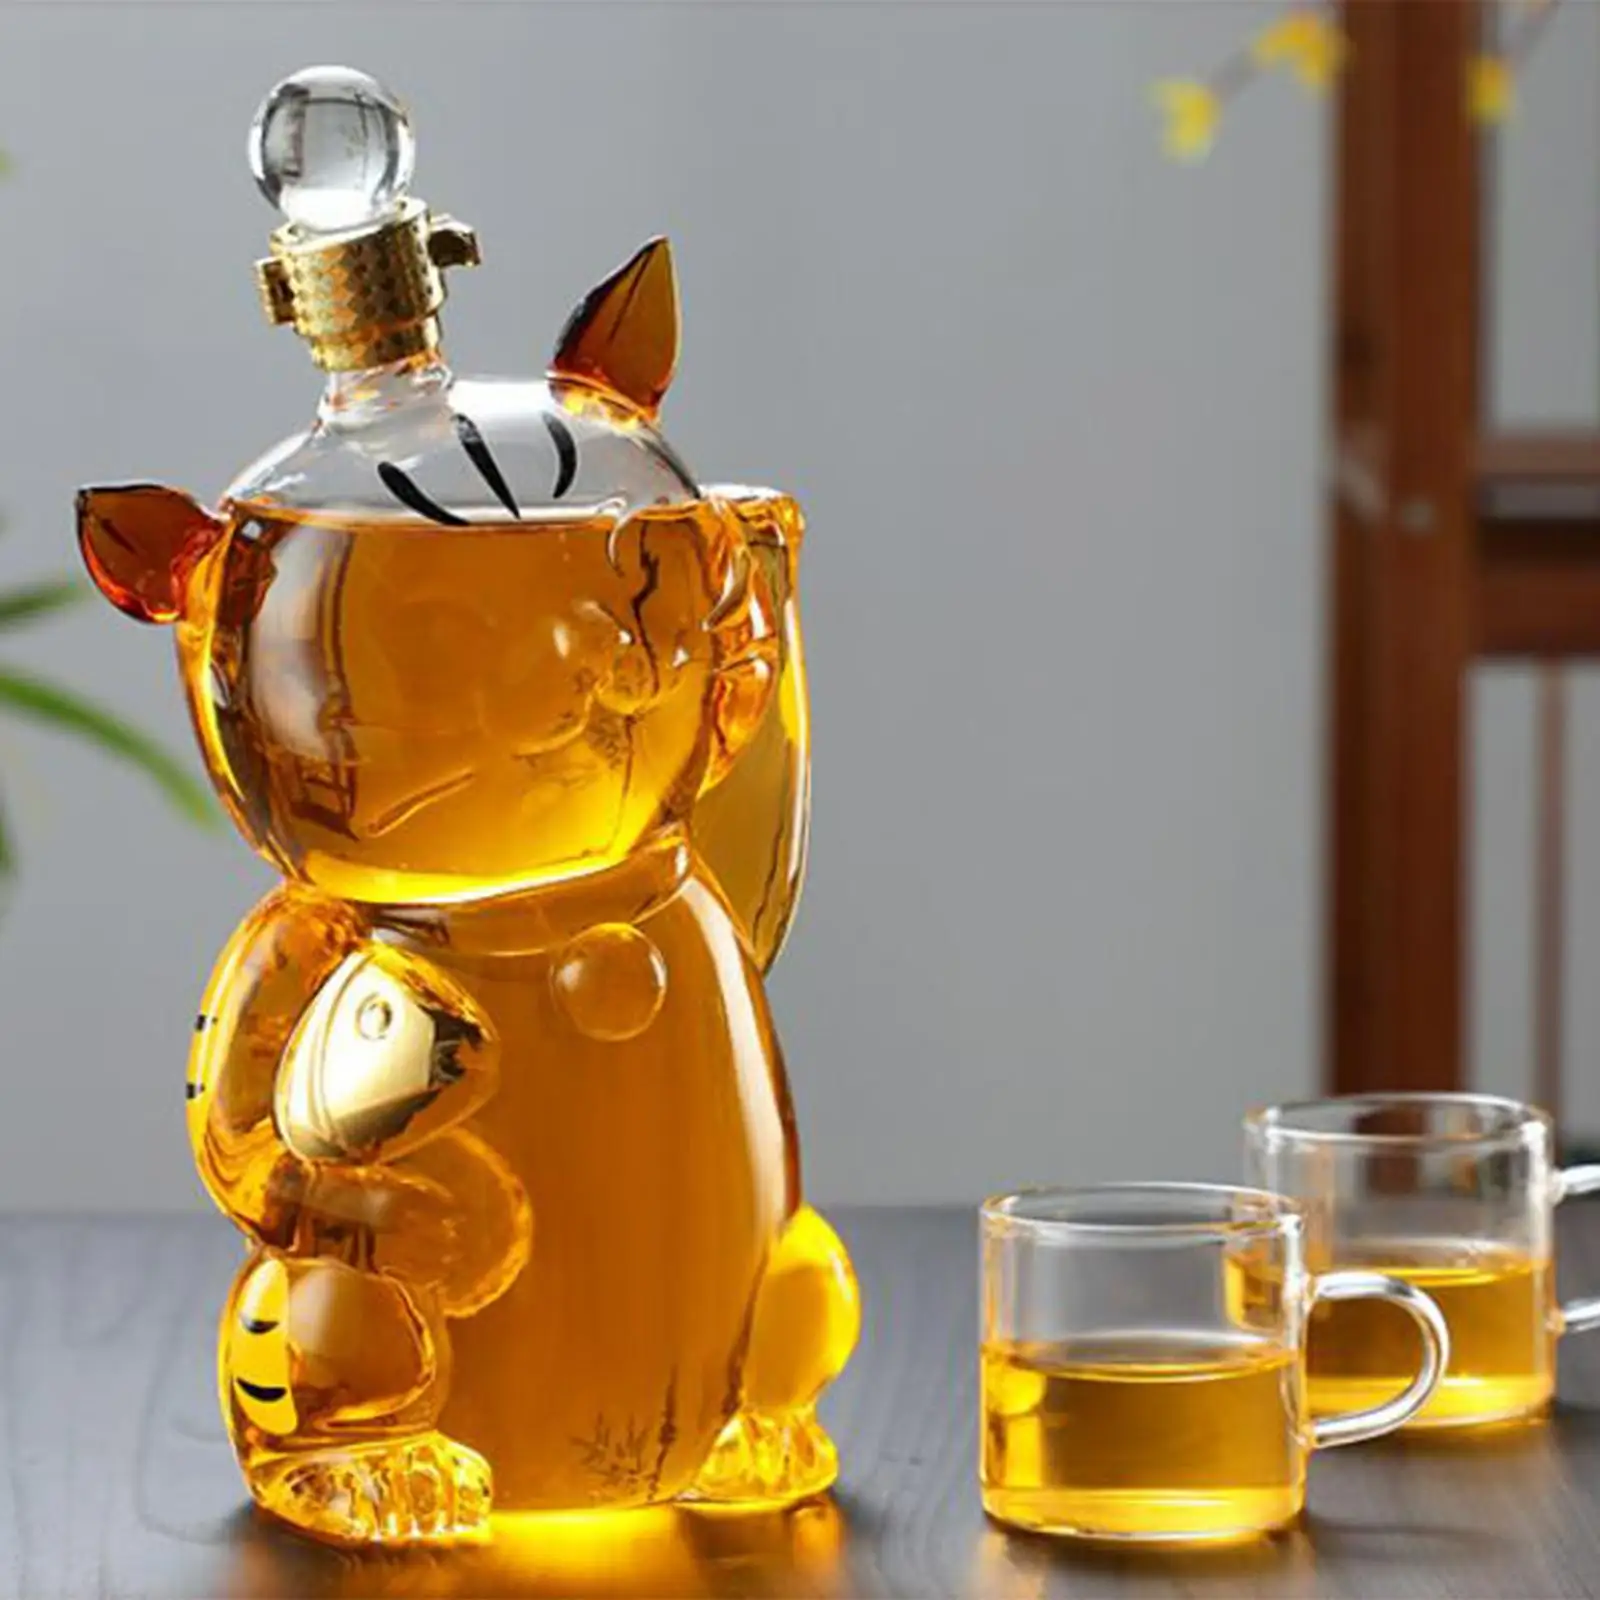 Large Decanter Holder with Stopper High Borosilicate Glass for Decoration